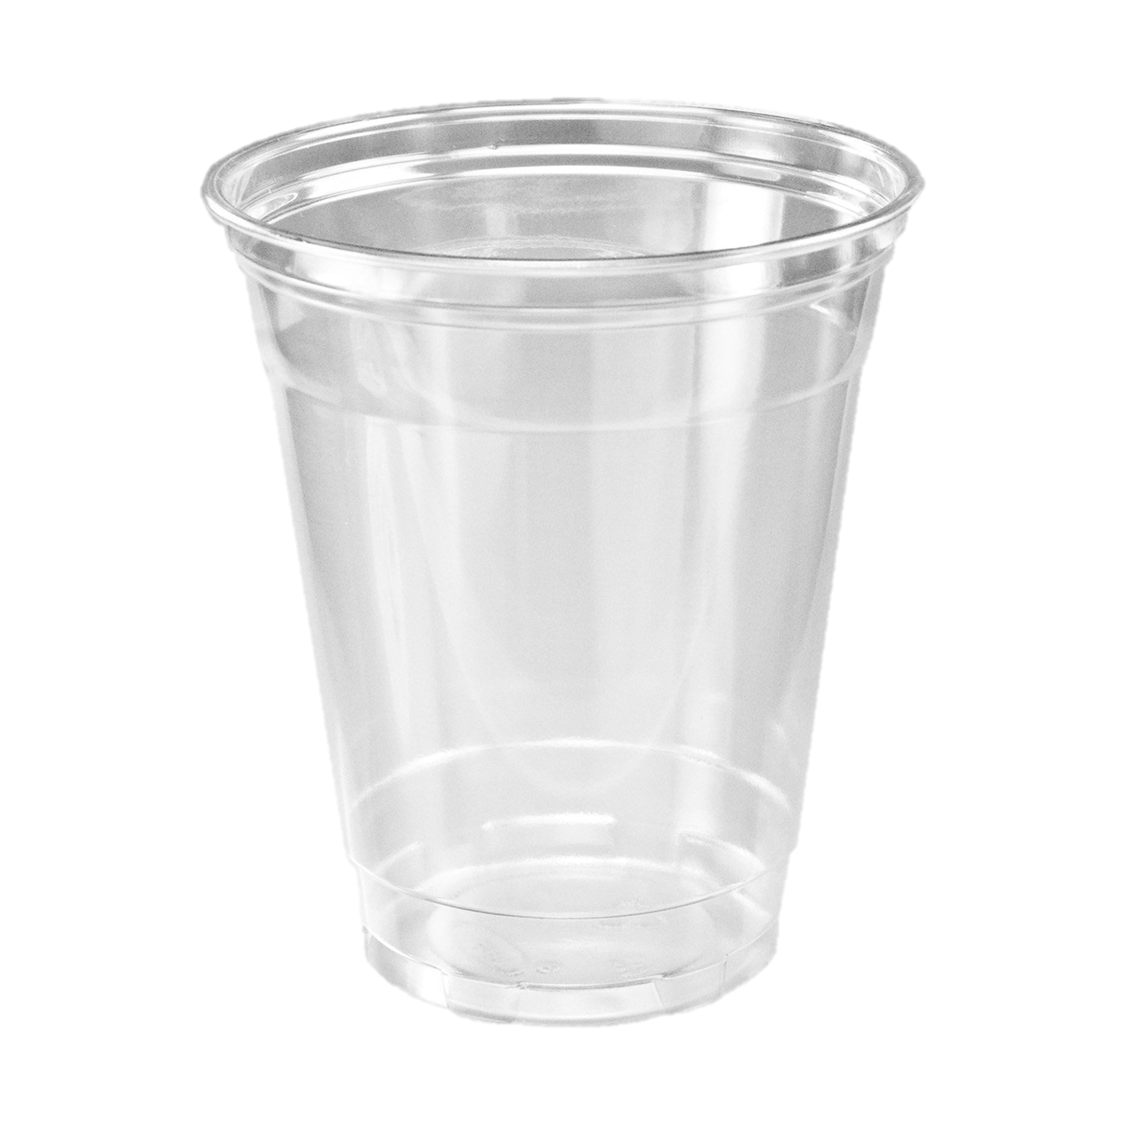 Plastic Cup Paper Cup Recycling Cup Png Download 1125 1125 Free Transparent Plastic Cup Png Download Clip Art Library